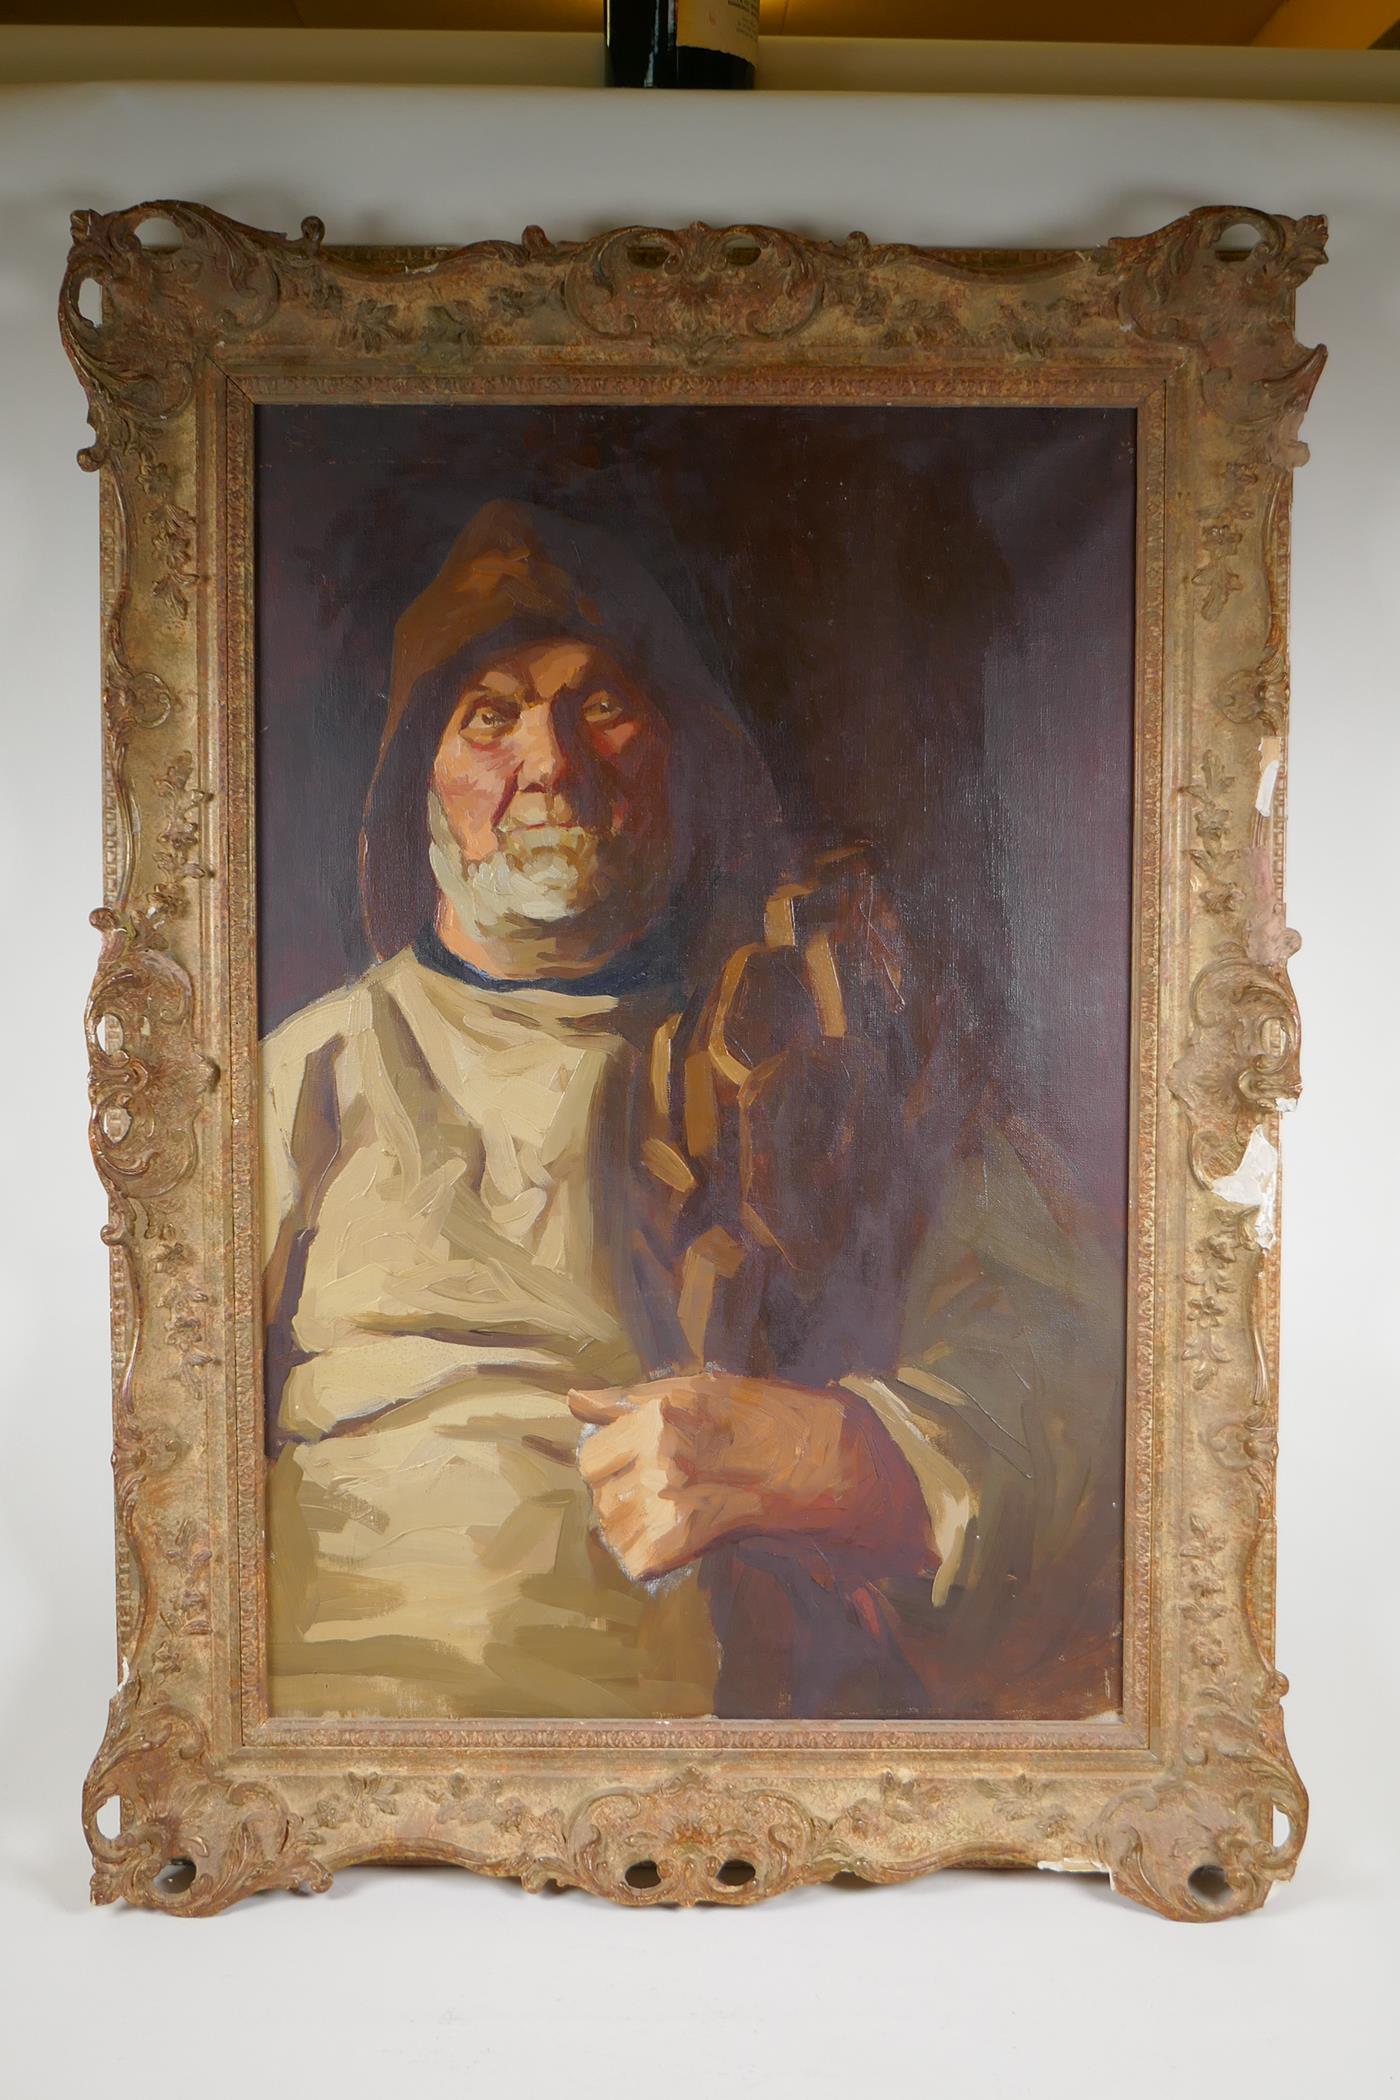 Portrait of a fisherman, early C20th, oil on canvas, 75 x 50cm - Image 4 of 5